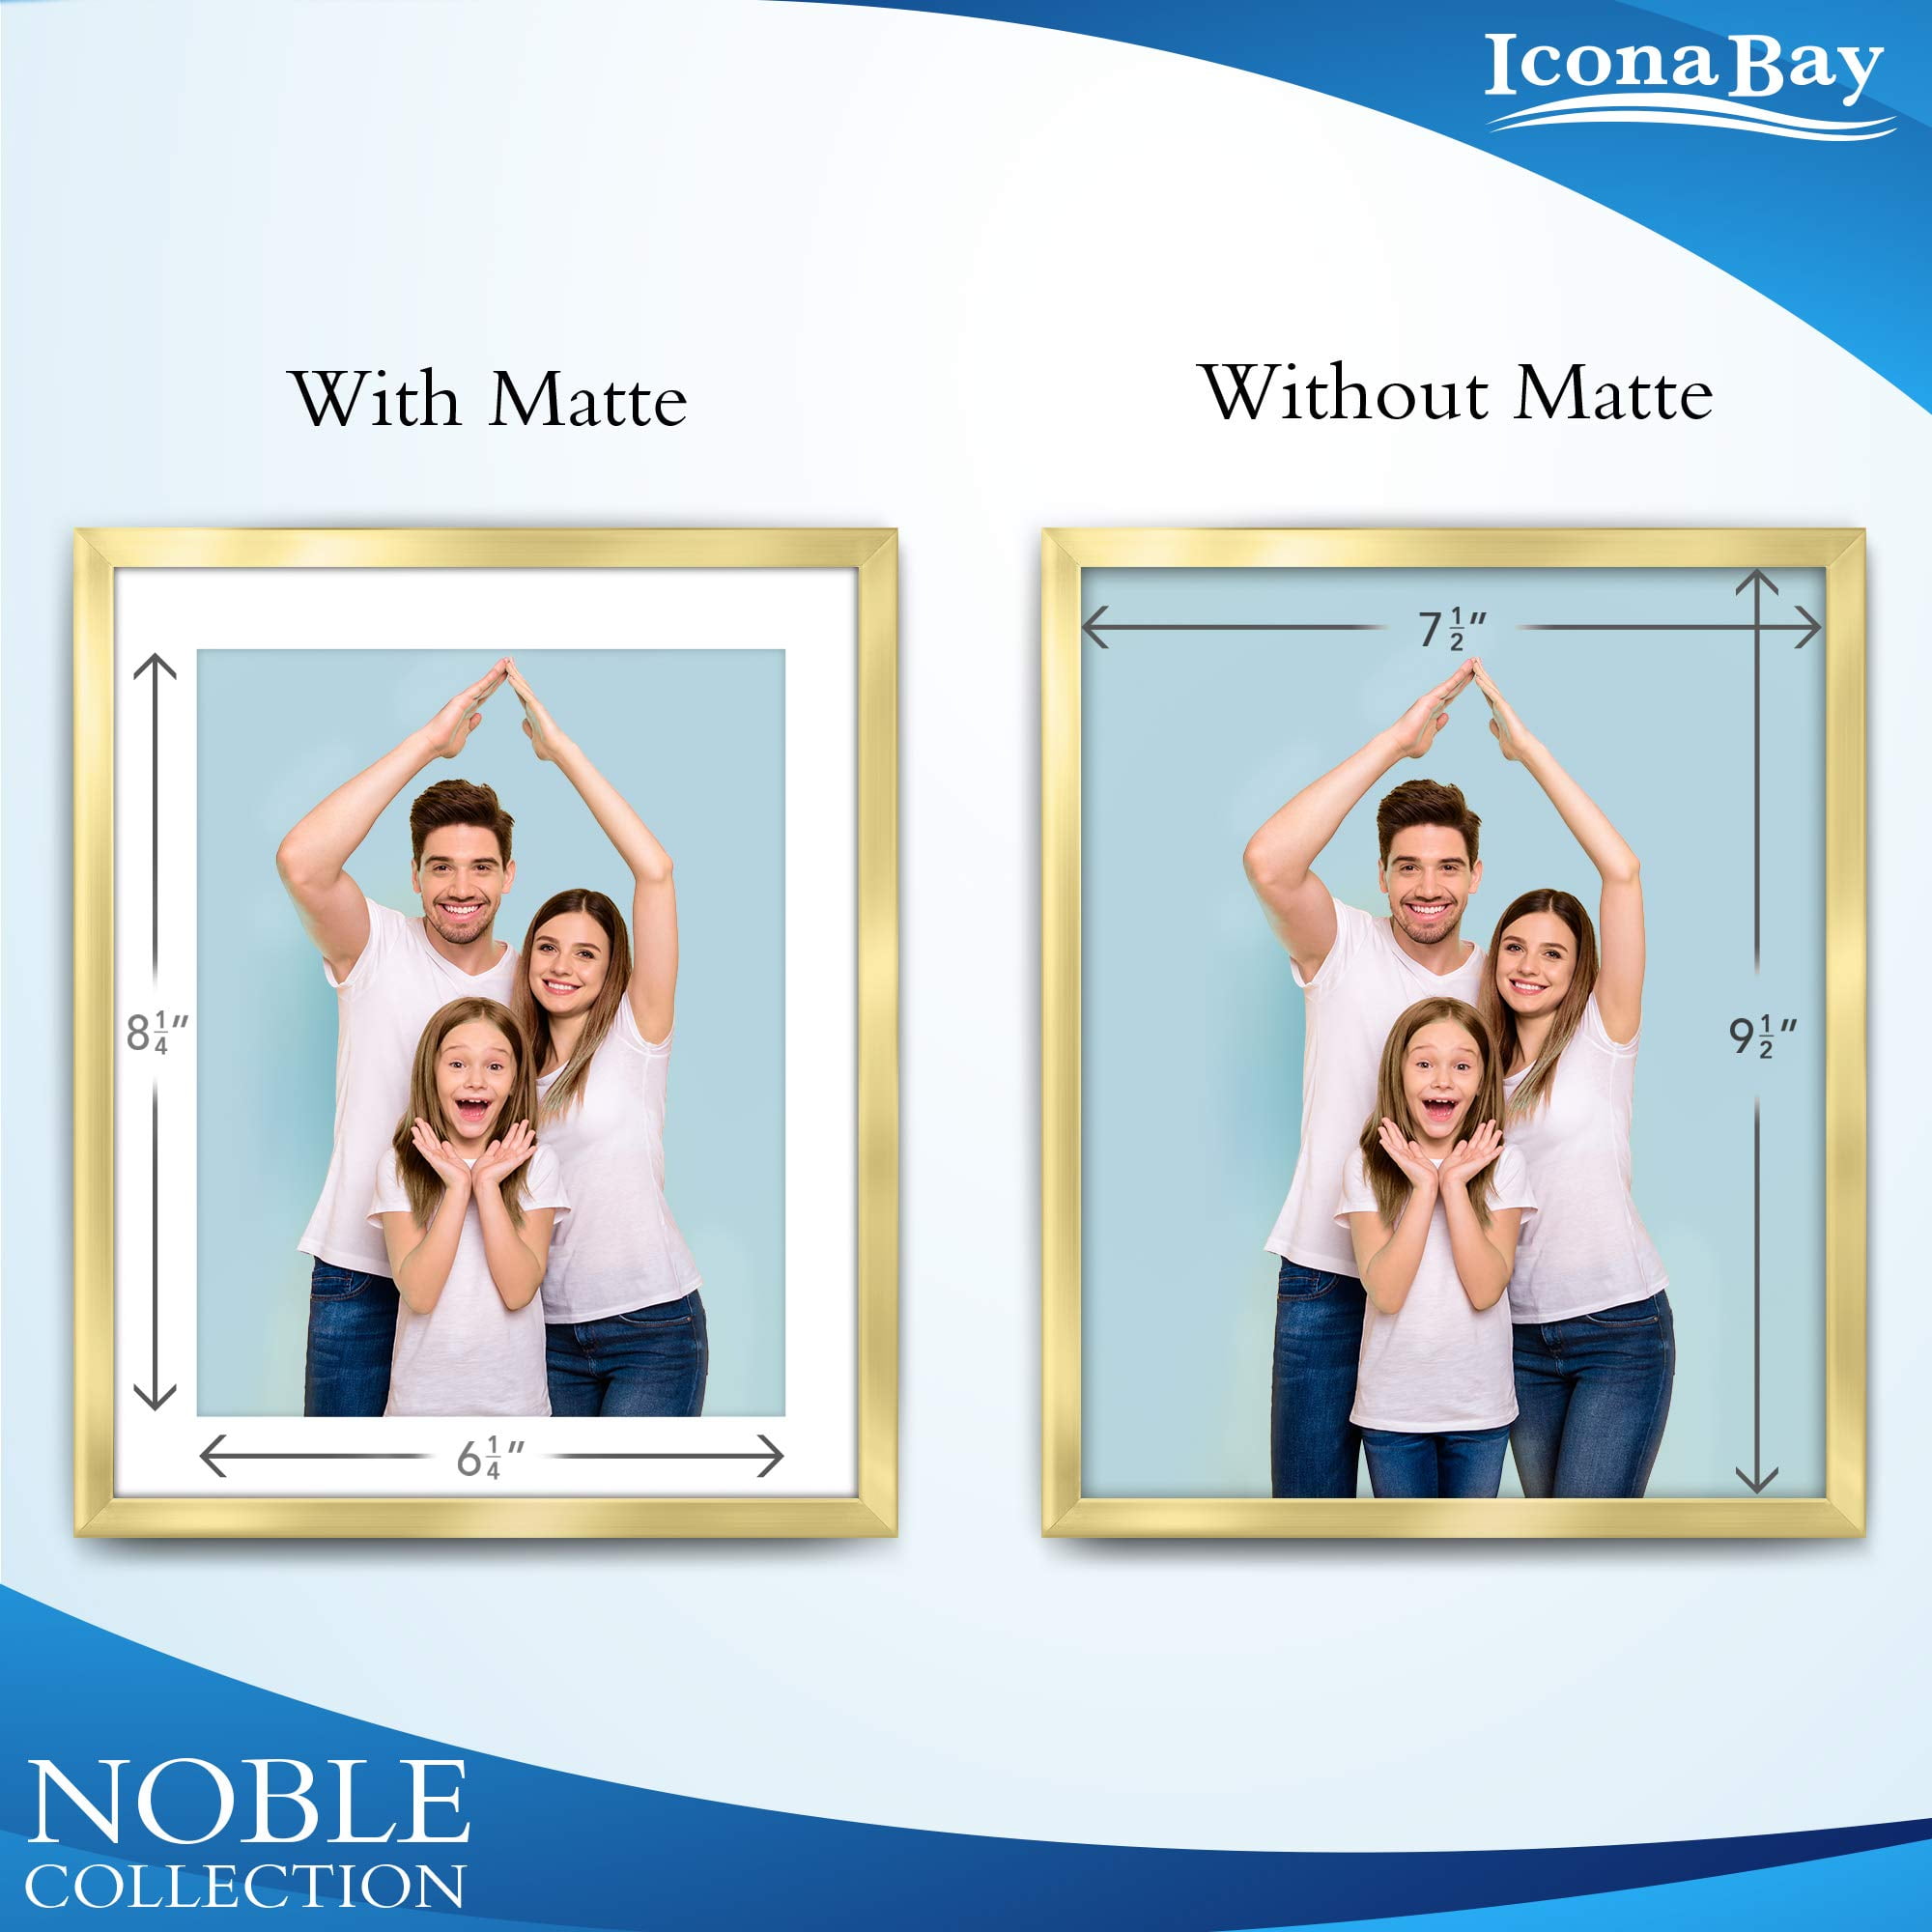  Icona Bay 8x10 Black Picture Frame w/Removable Mat to 5x7,  Modern Double-Beveled Frame, Tabletop or Wall Mount, Eve Collection